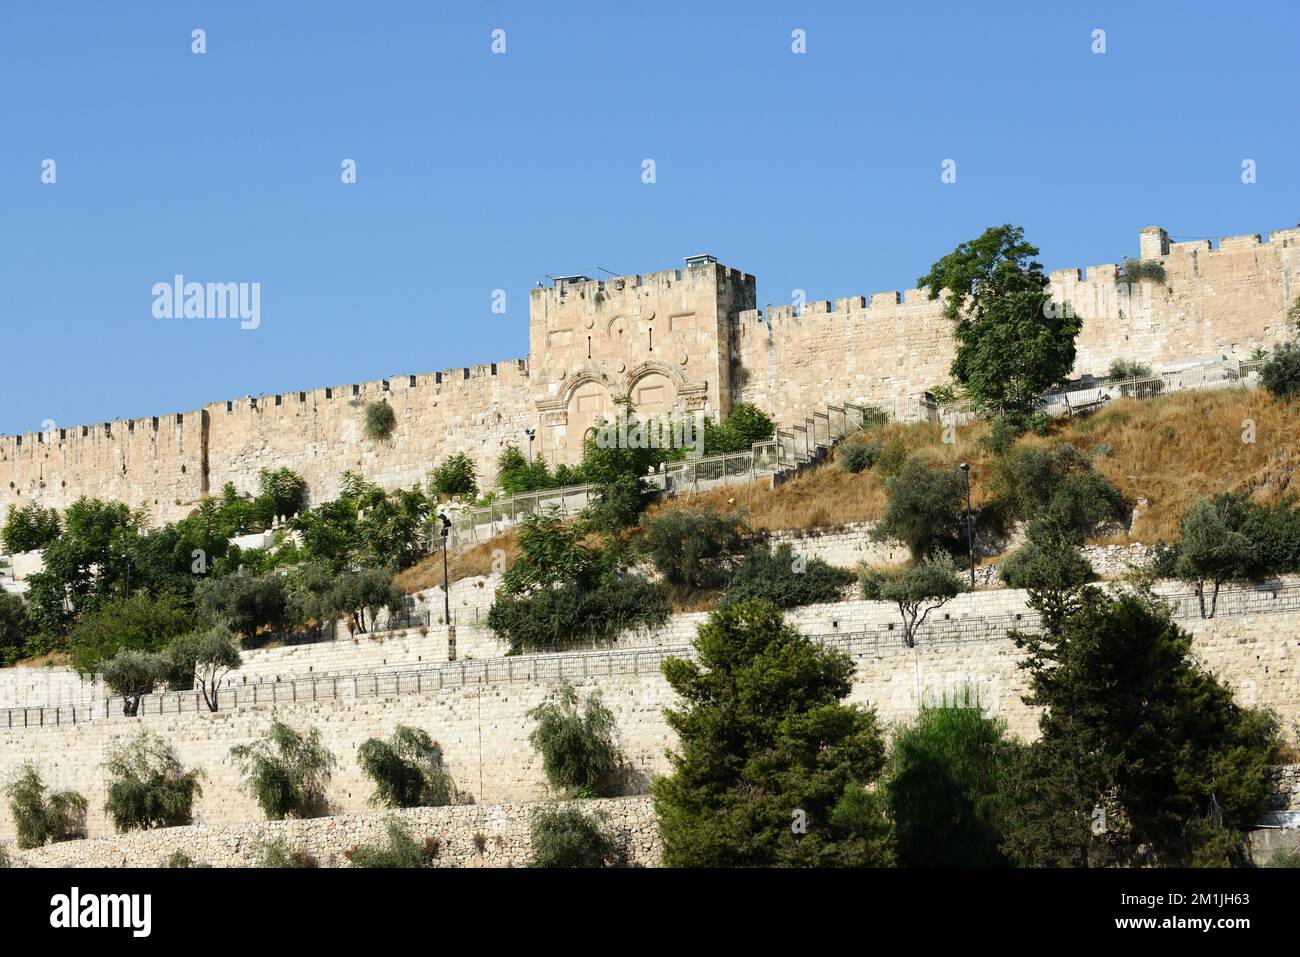 The iconic Golden Gate in the Eastern part of the city wall of the old city of Jerusalem. Stock Photo